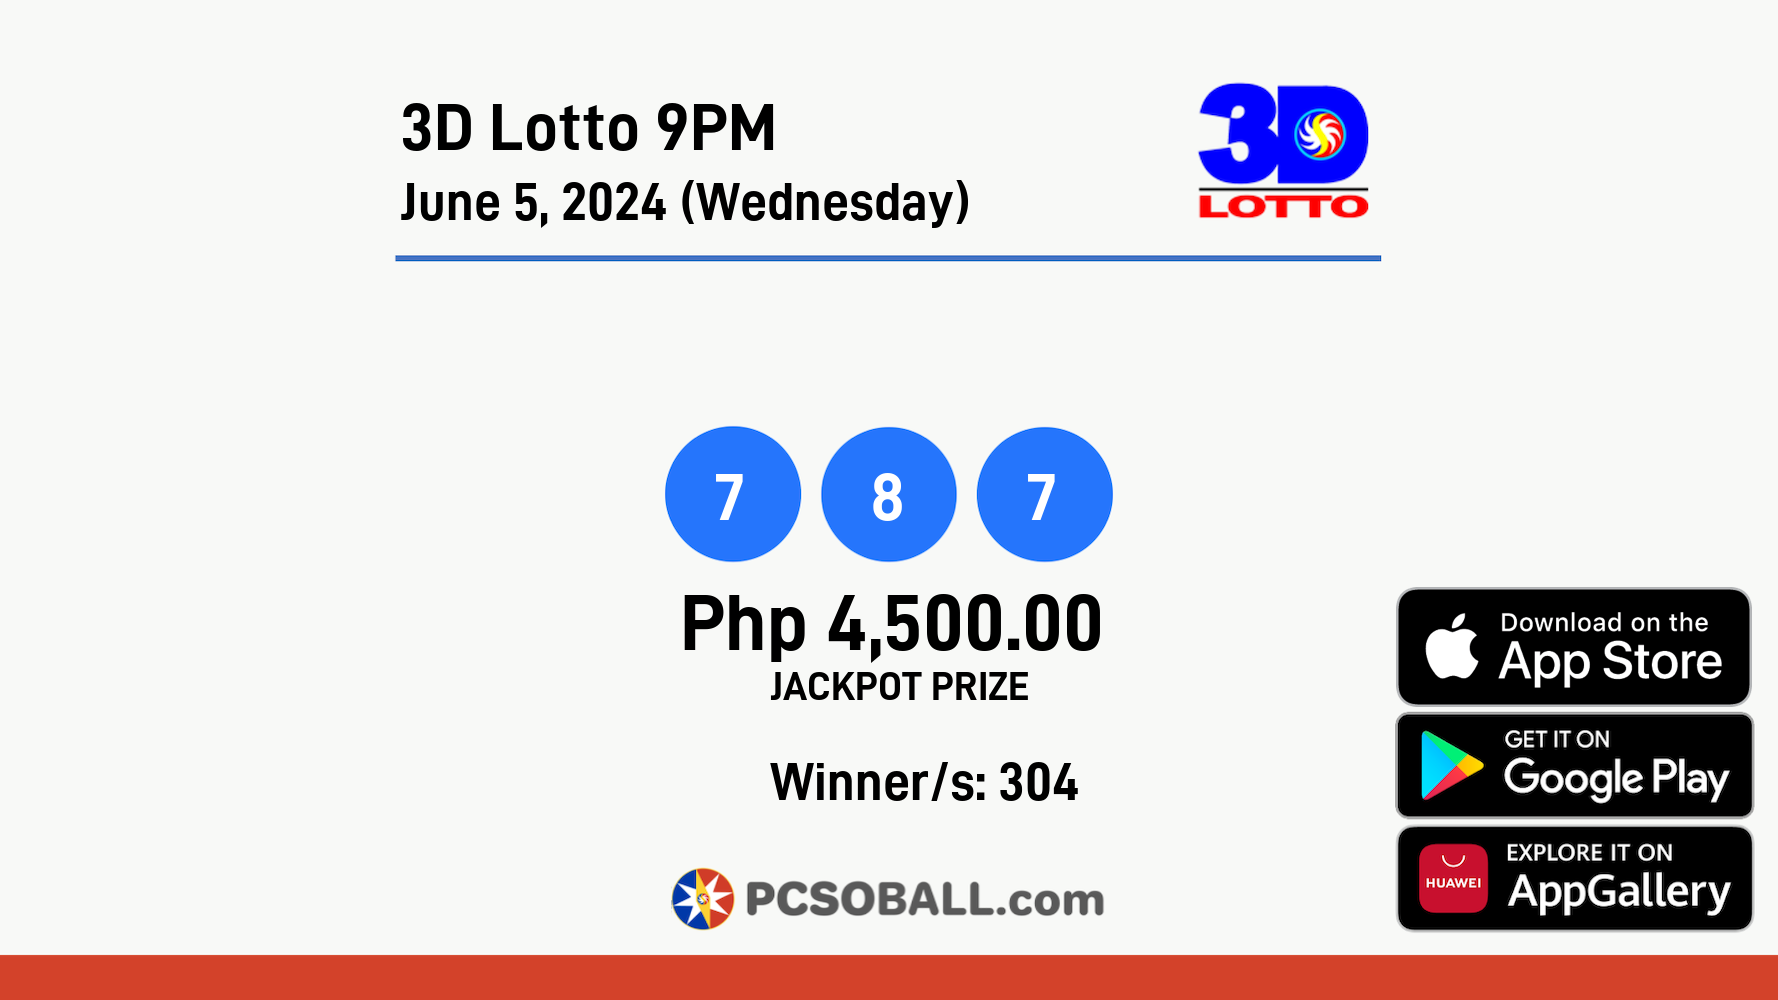 3D Lotto 9PM June 5, 2024 (Wednesday) Result